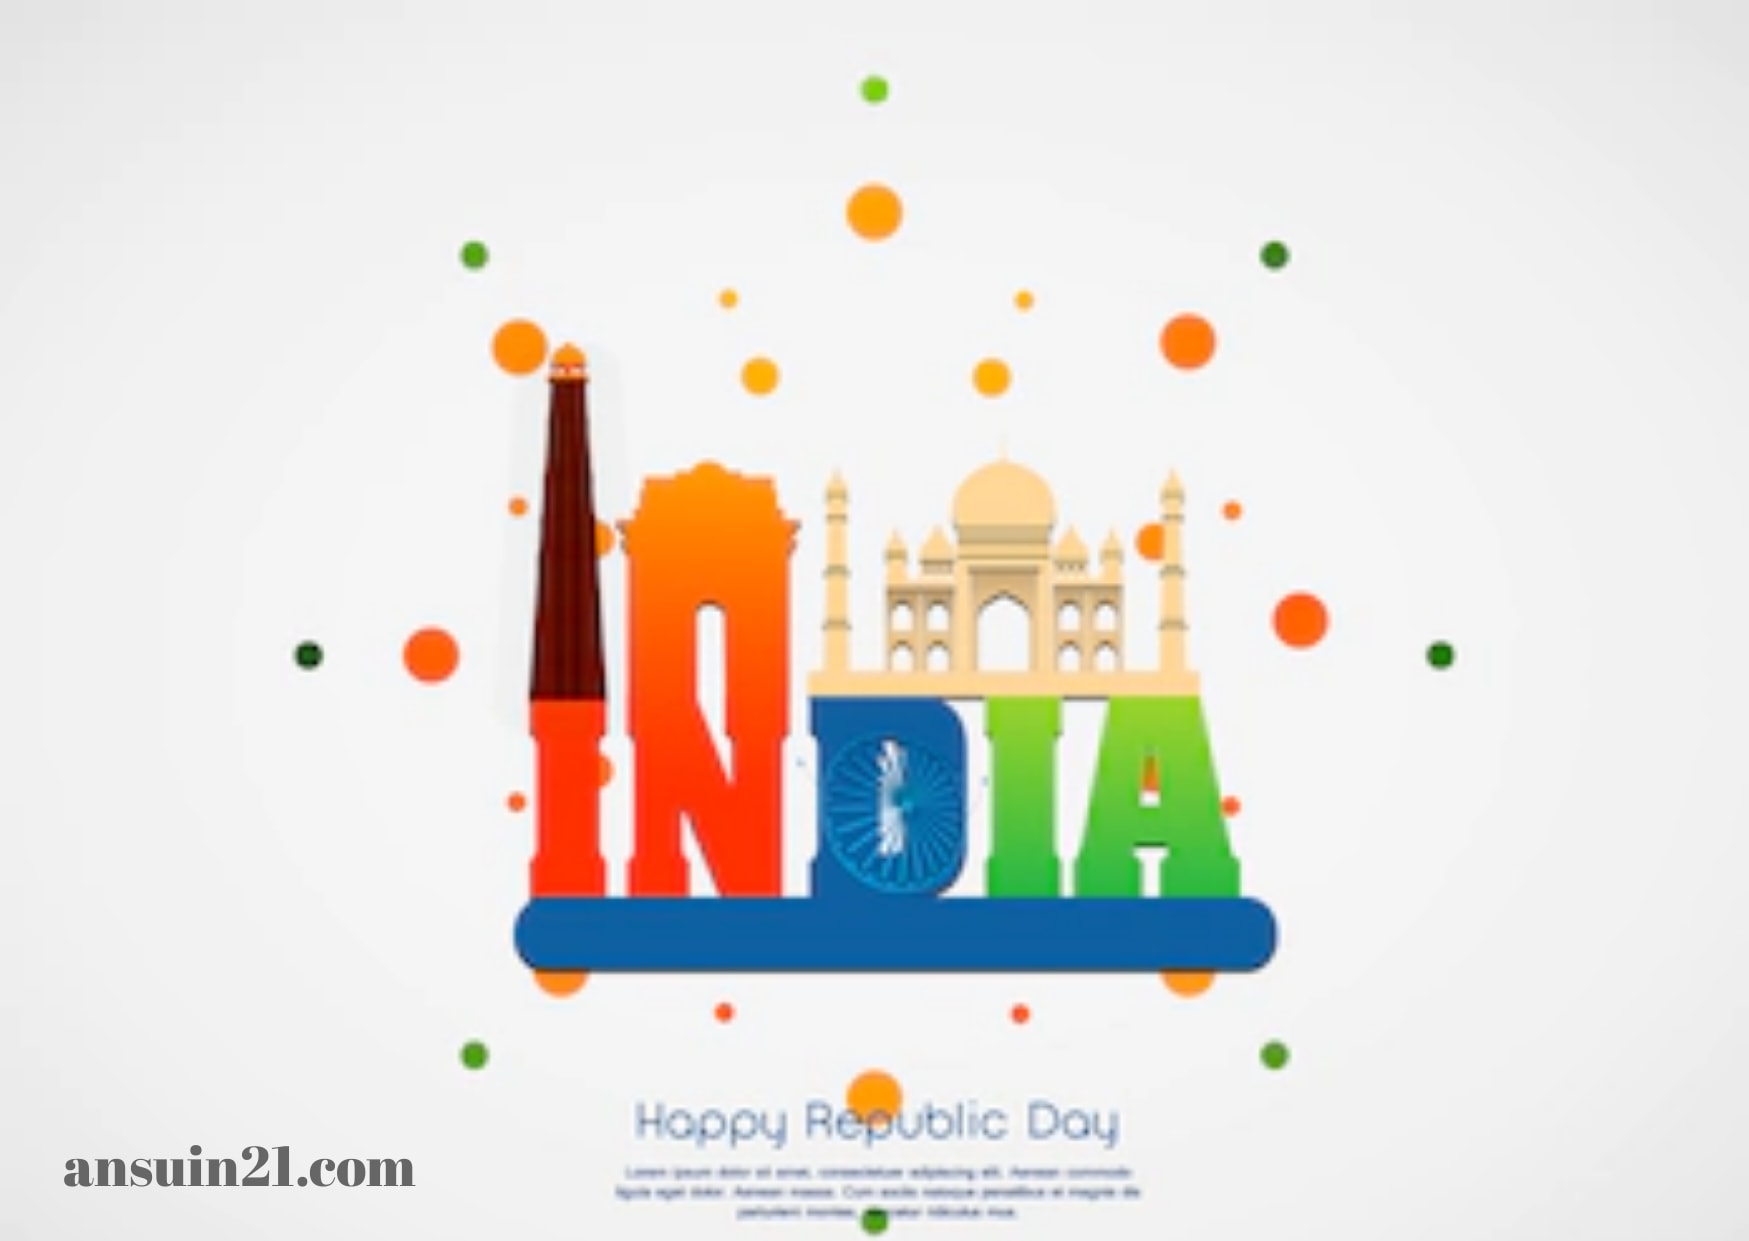 26 January Republic Day, Happy Republic Day Images Wishes,